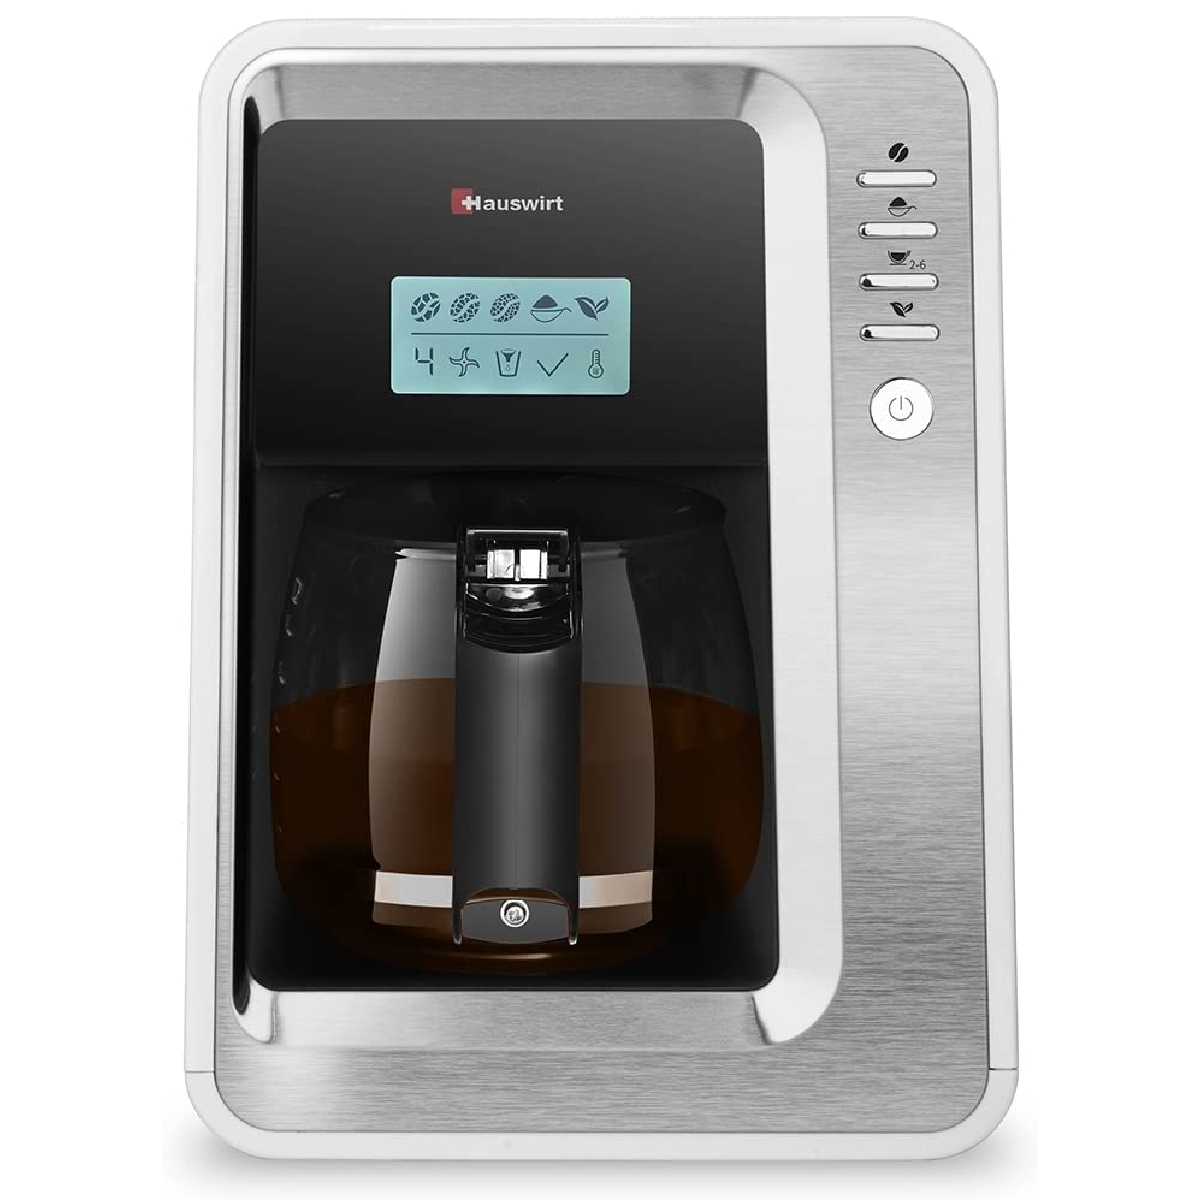 HAUSWIRT K6 Automatic Grind and Brew Coffee Maker